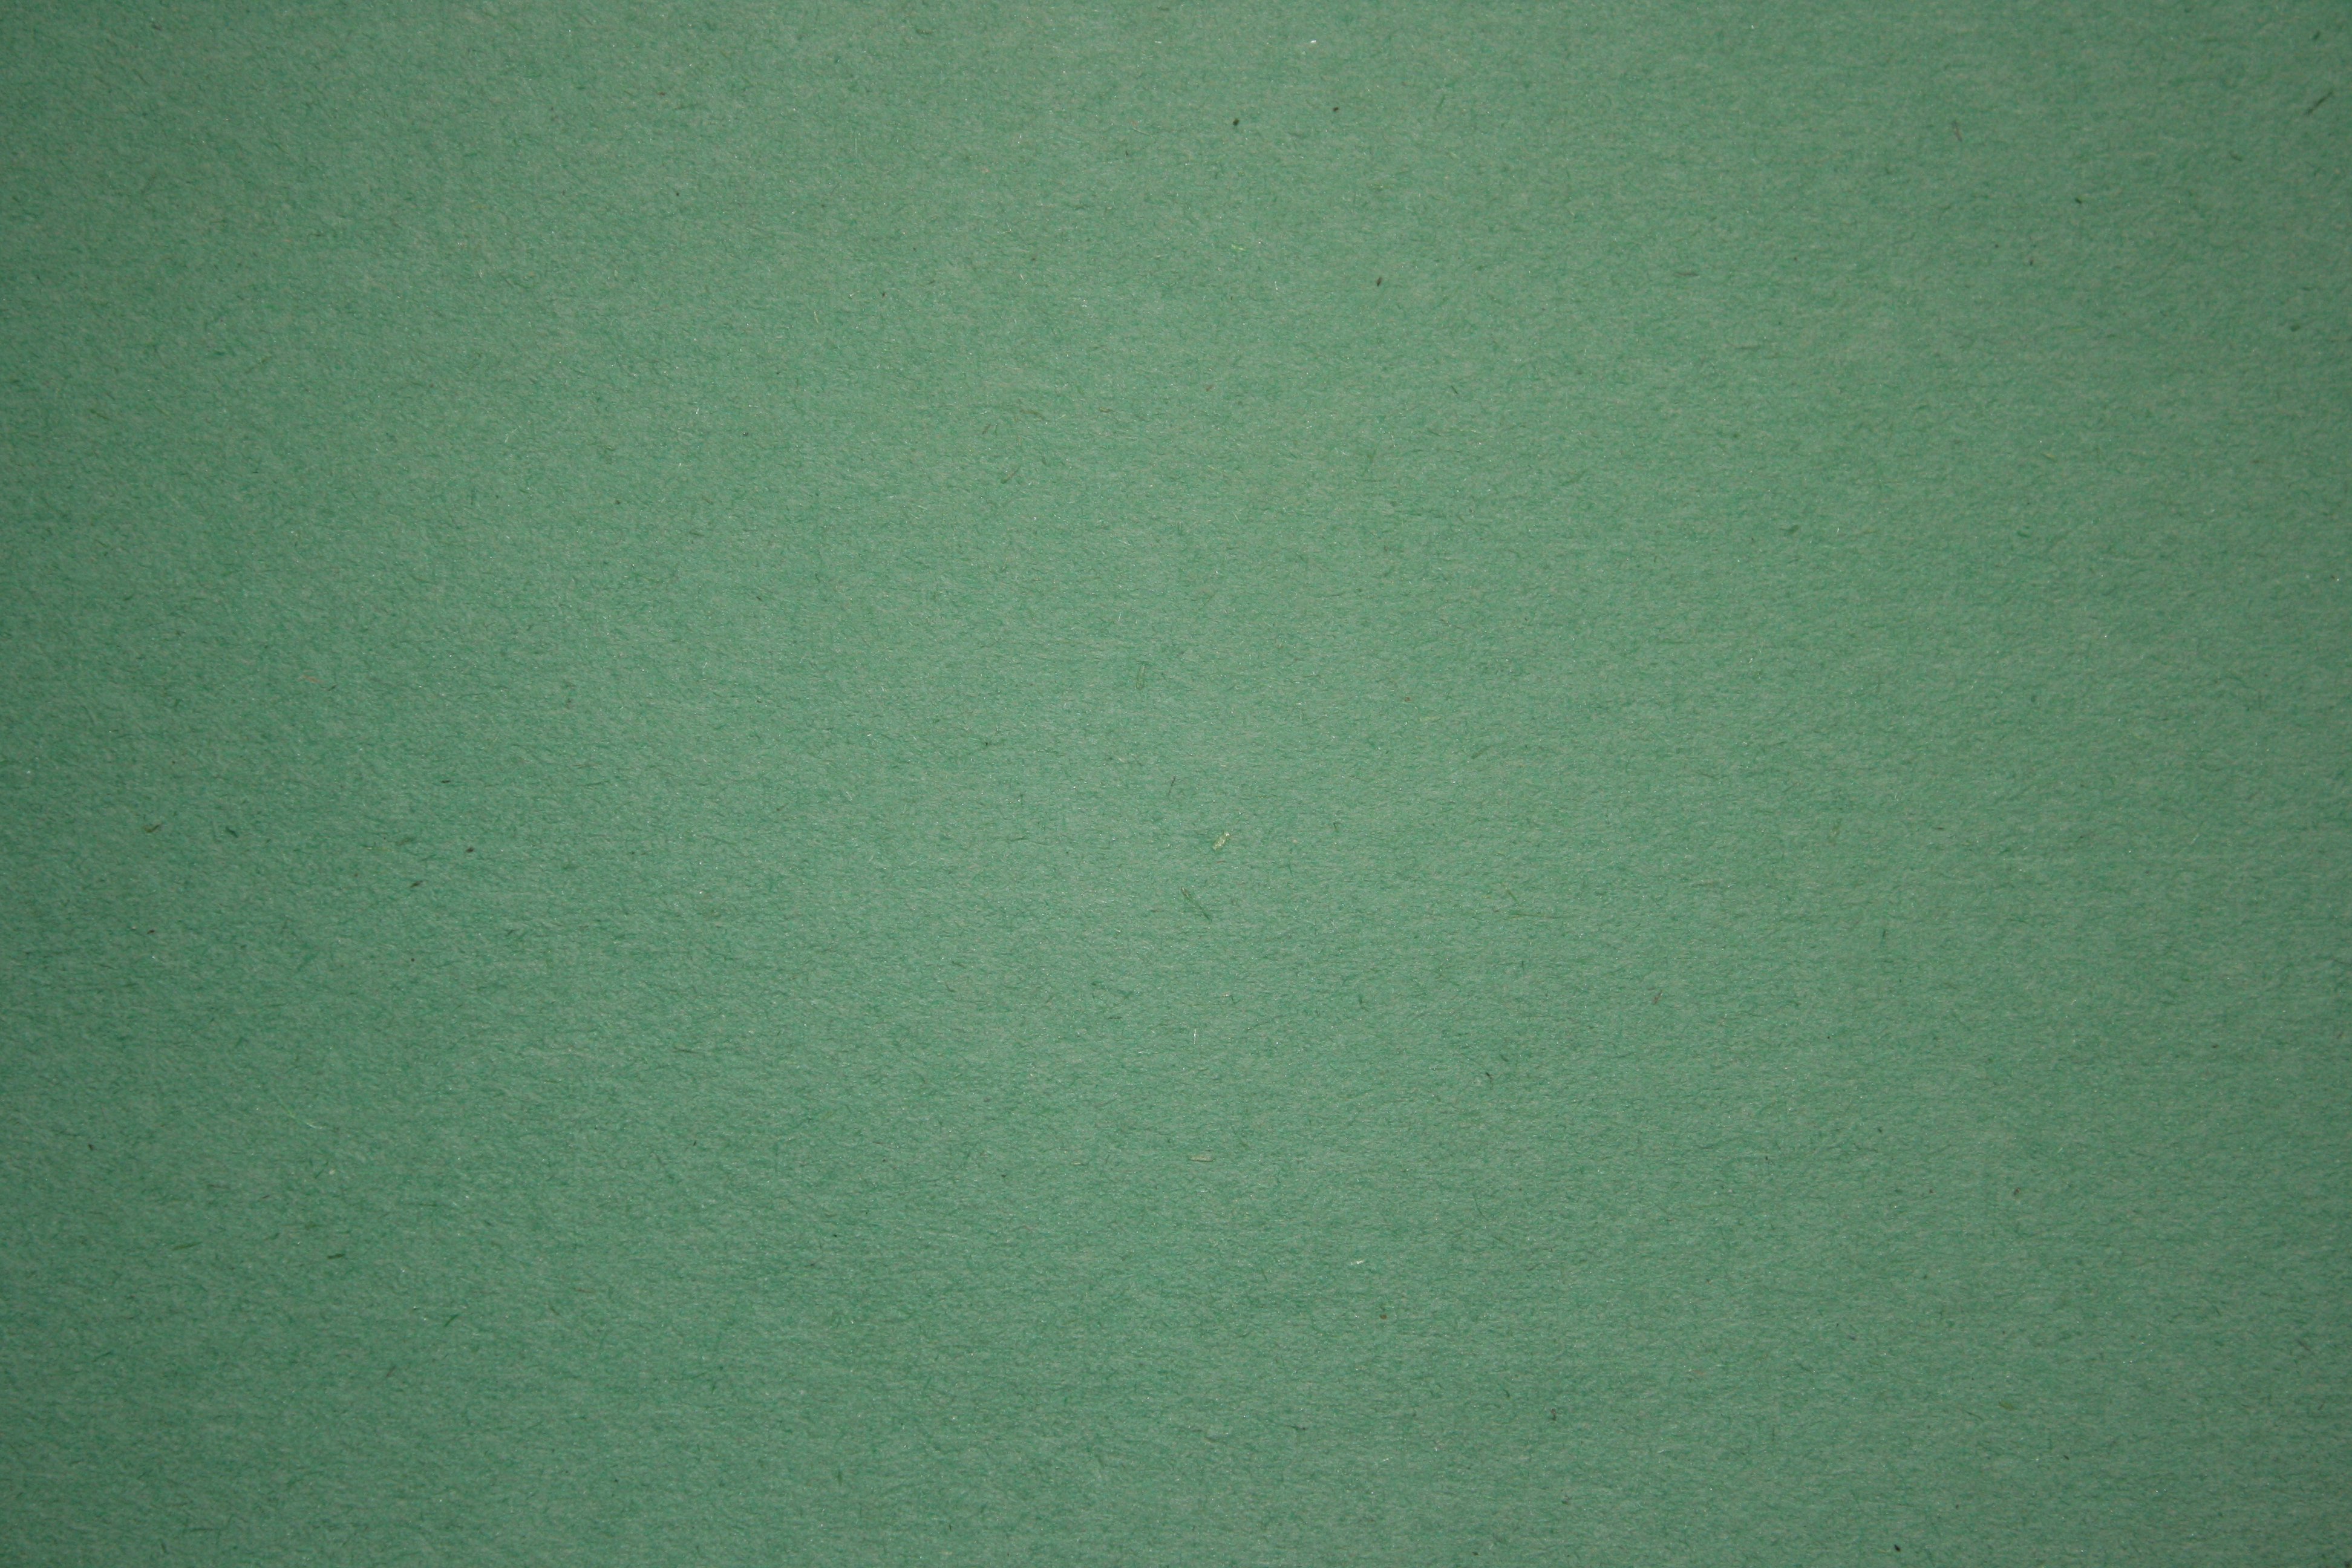 Background of Green Construction Paper, Cardboard Paper Texture Stock Image  - Image of textured, page: 205128375